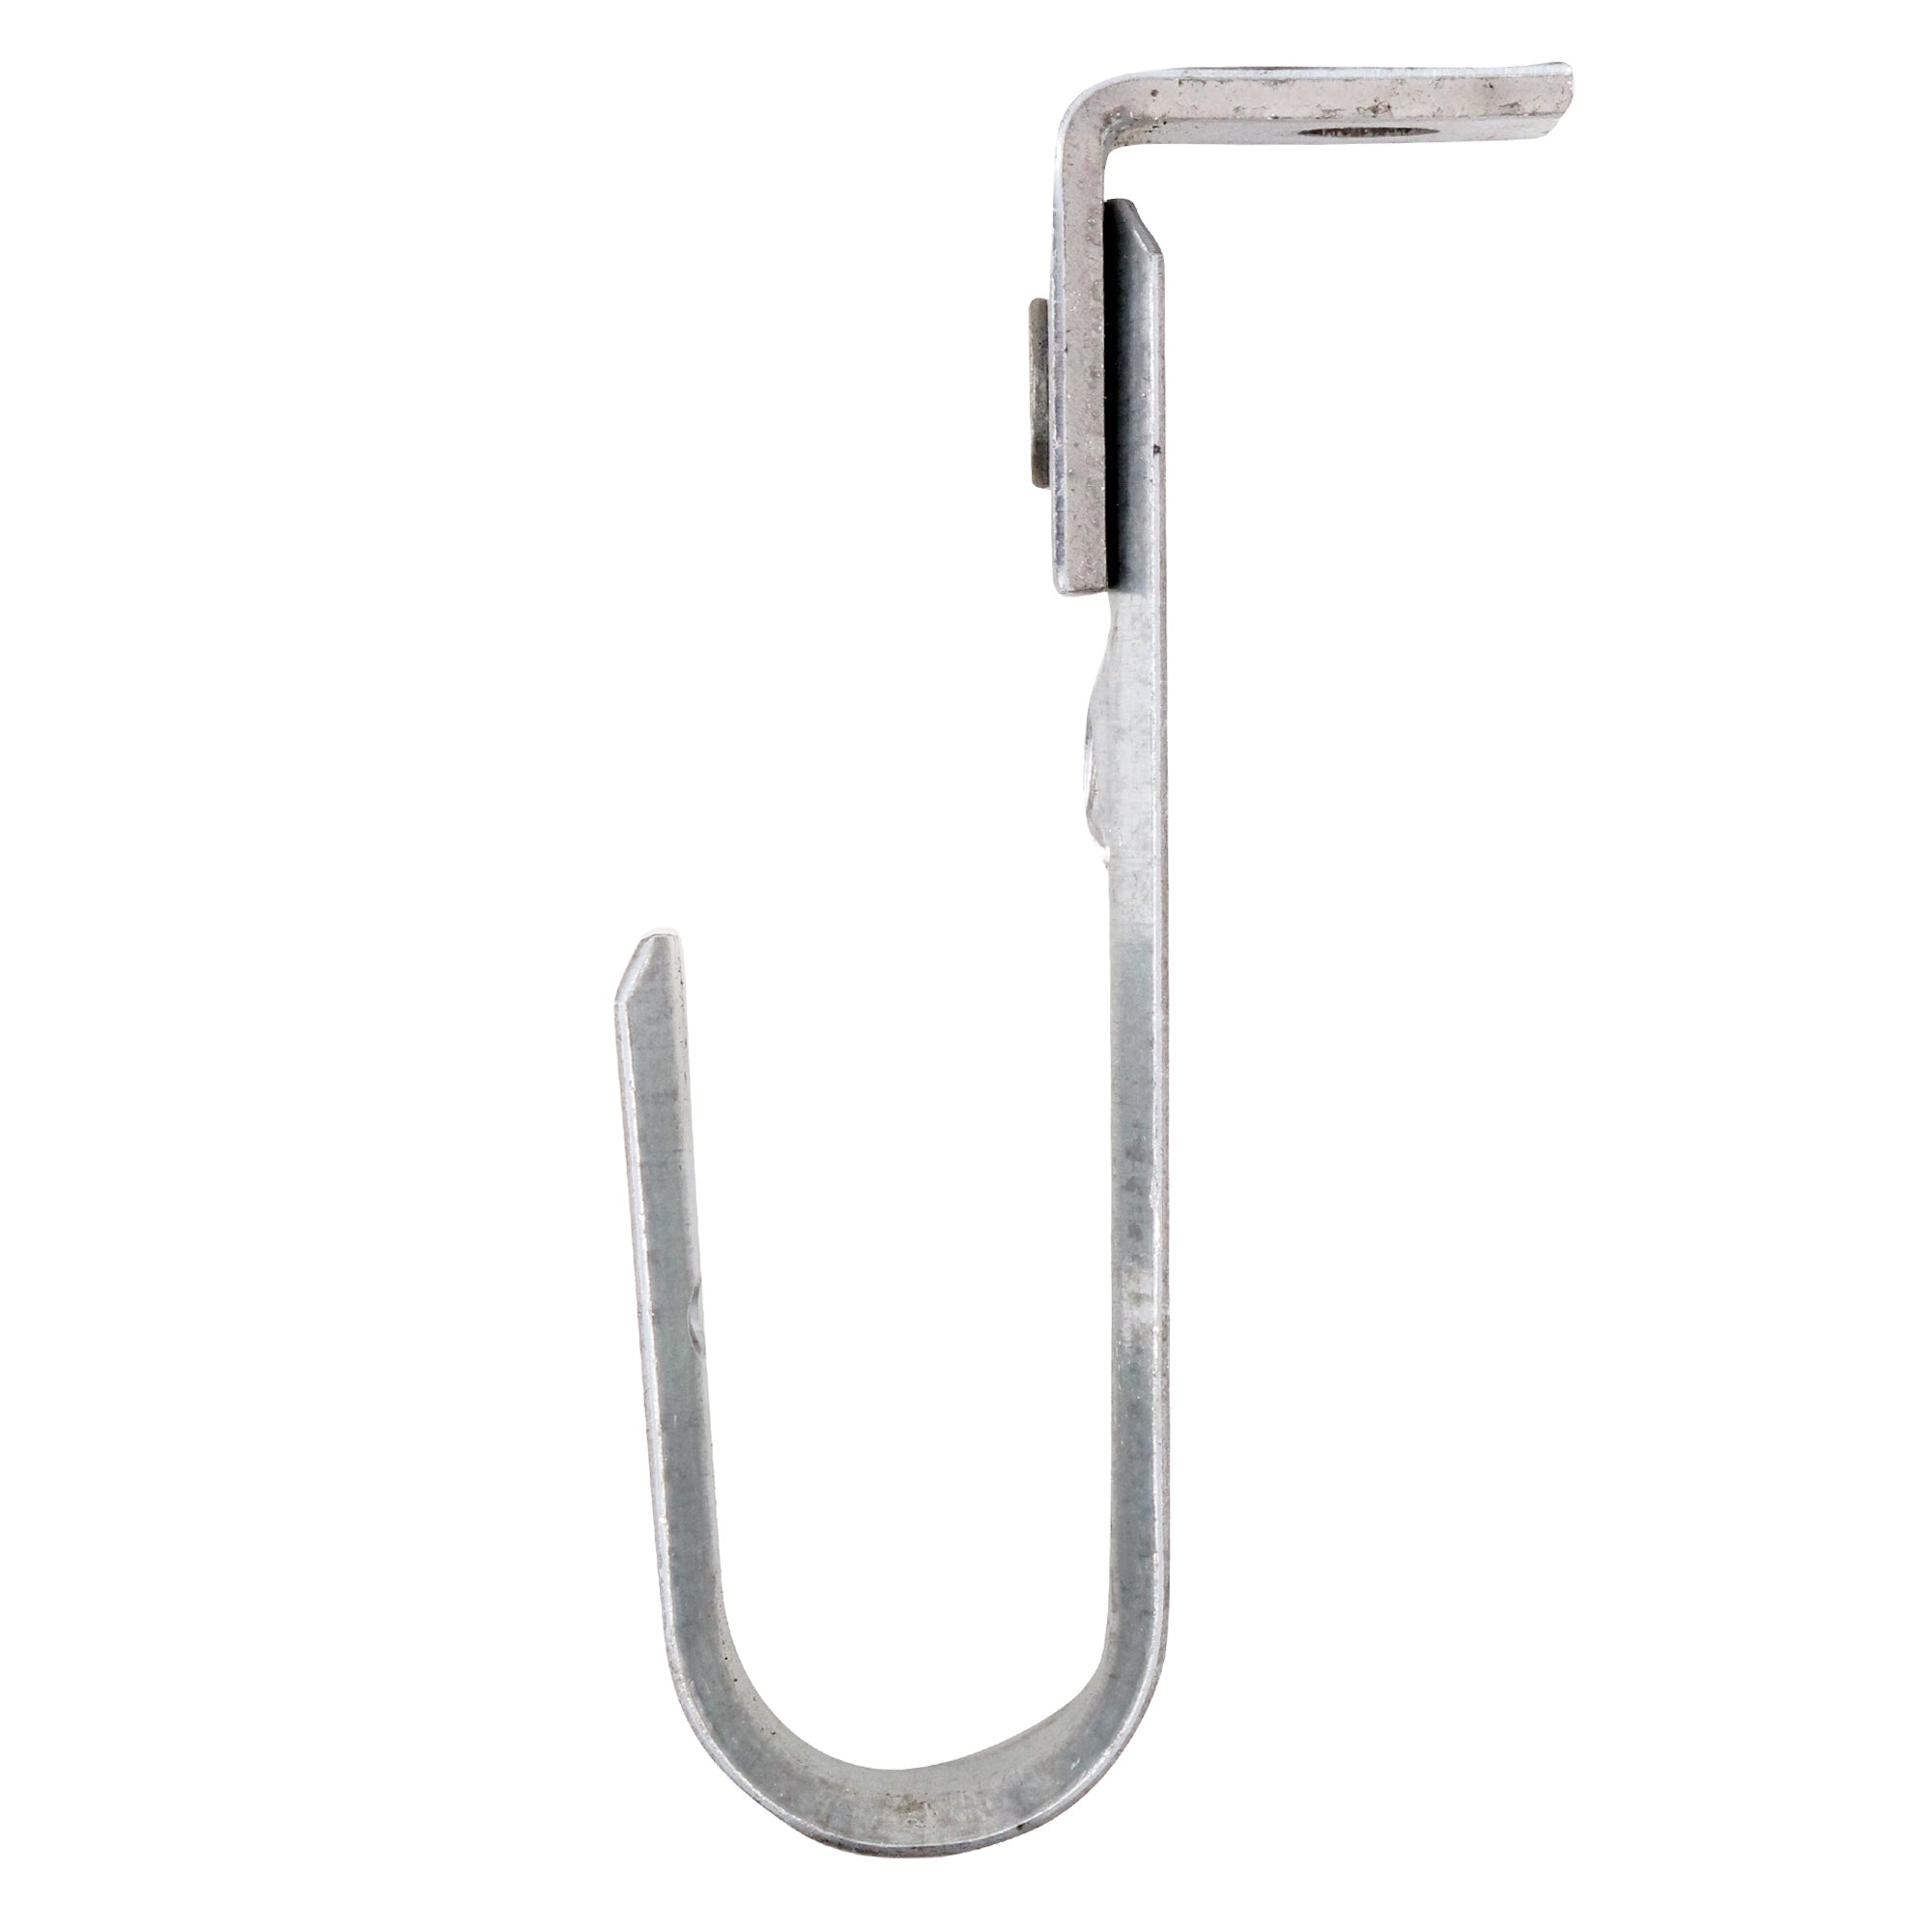 1-5/16” J-HOOK ASSEMBLED TO BEAM CLAMP- 40PK